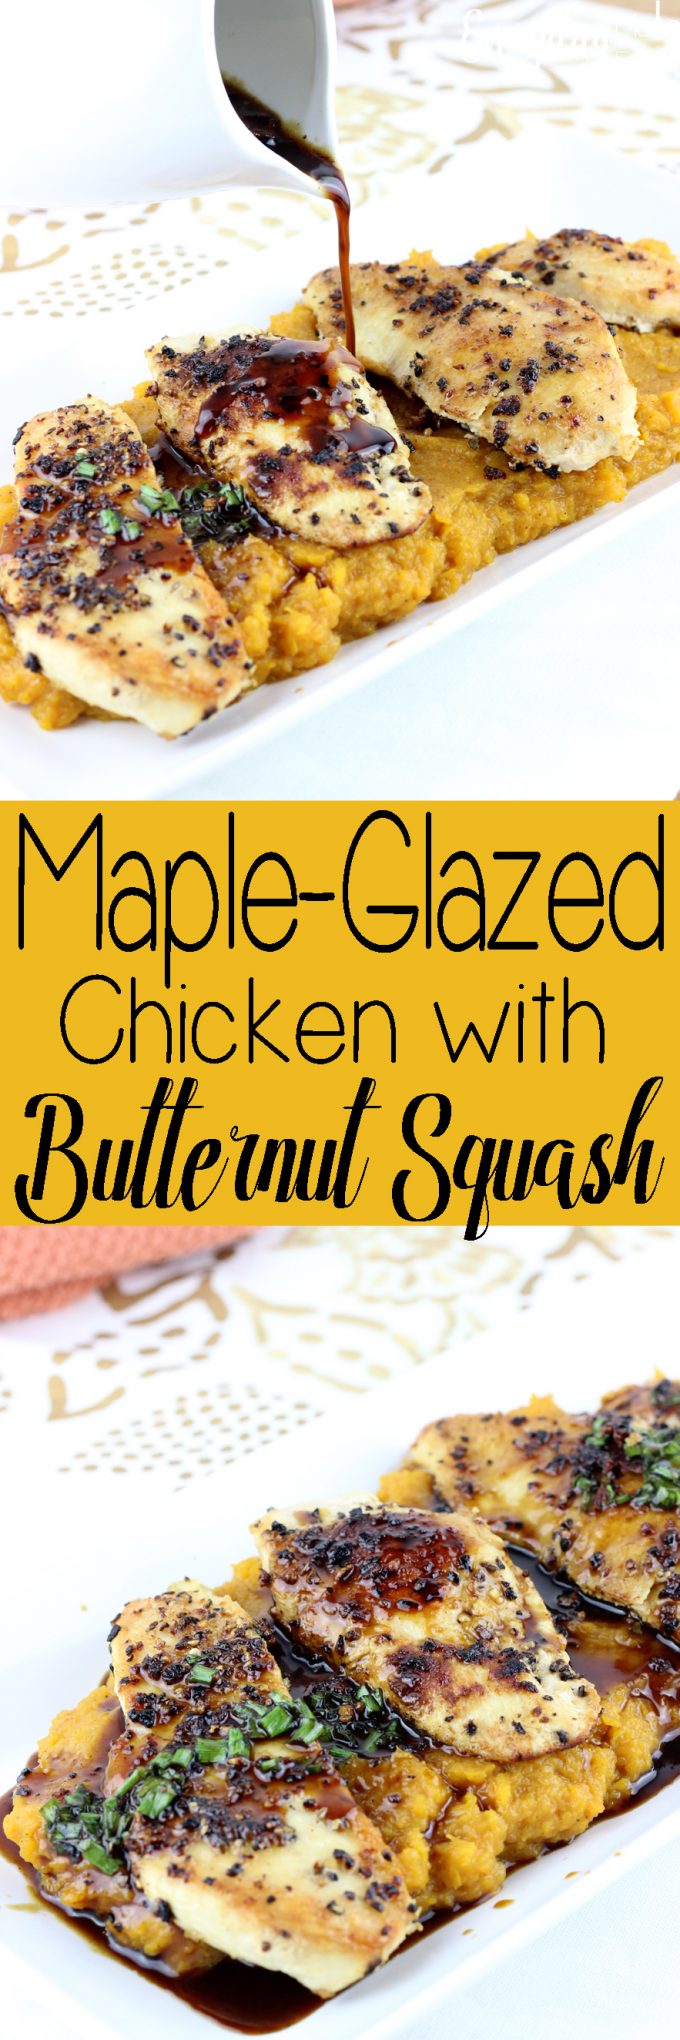 Maple-Glazed Chicken with Butternut Squash is a quick dinner recipe that has the flavors of  fall and winter. | EverydayMadeFresh.com